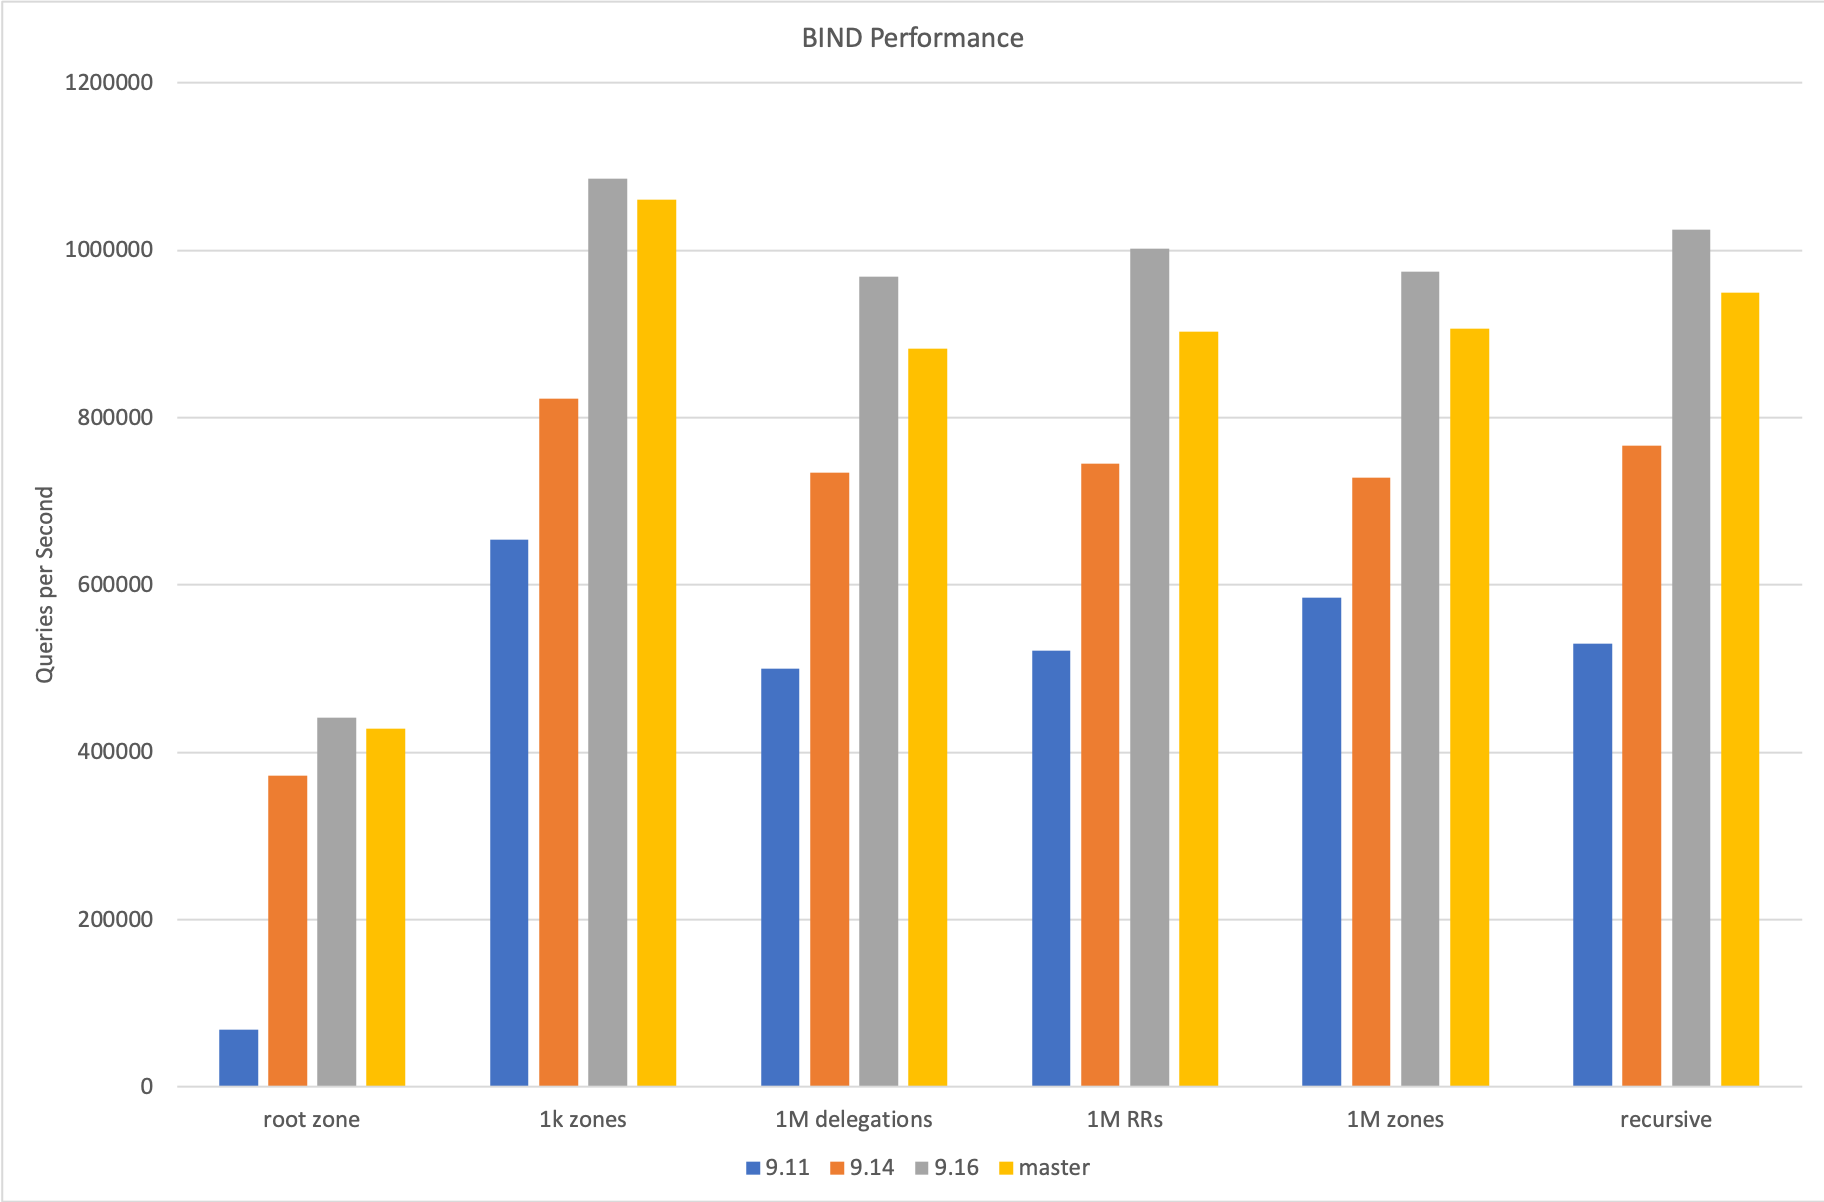 Bar chart comparing performance of different BIND 9 versions